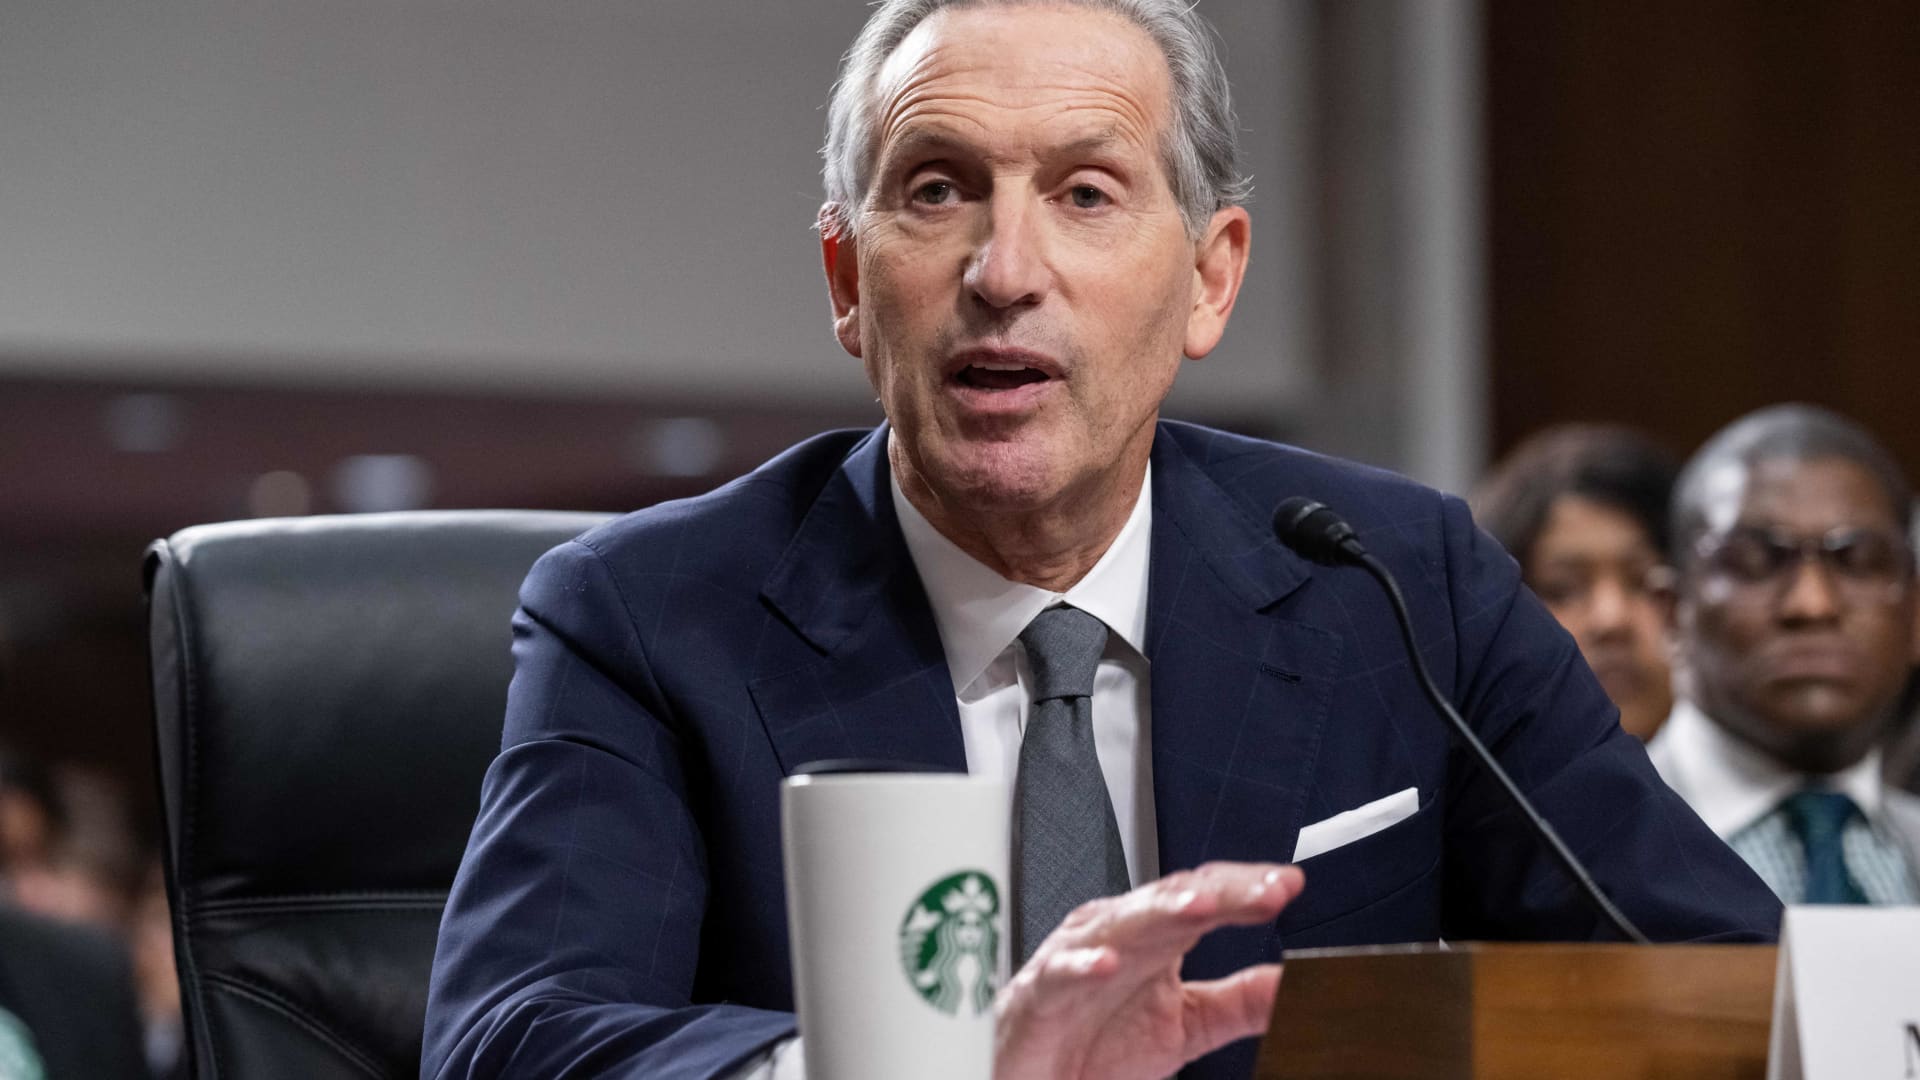 Starbucks fired the employee responsible for igniting the Starbucks Workers United union campaign